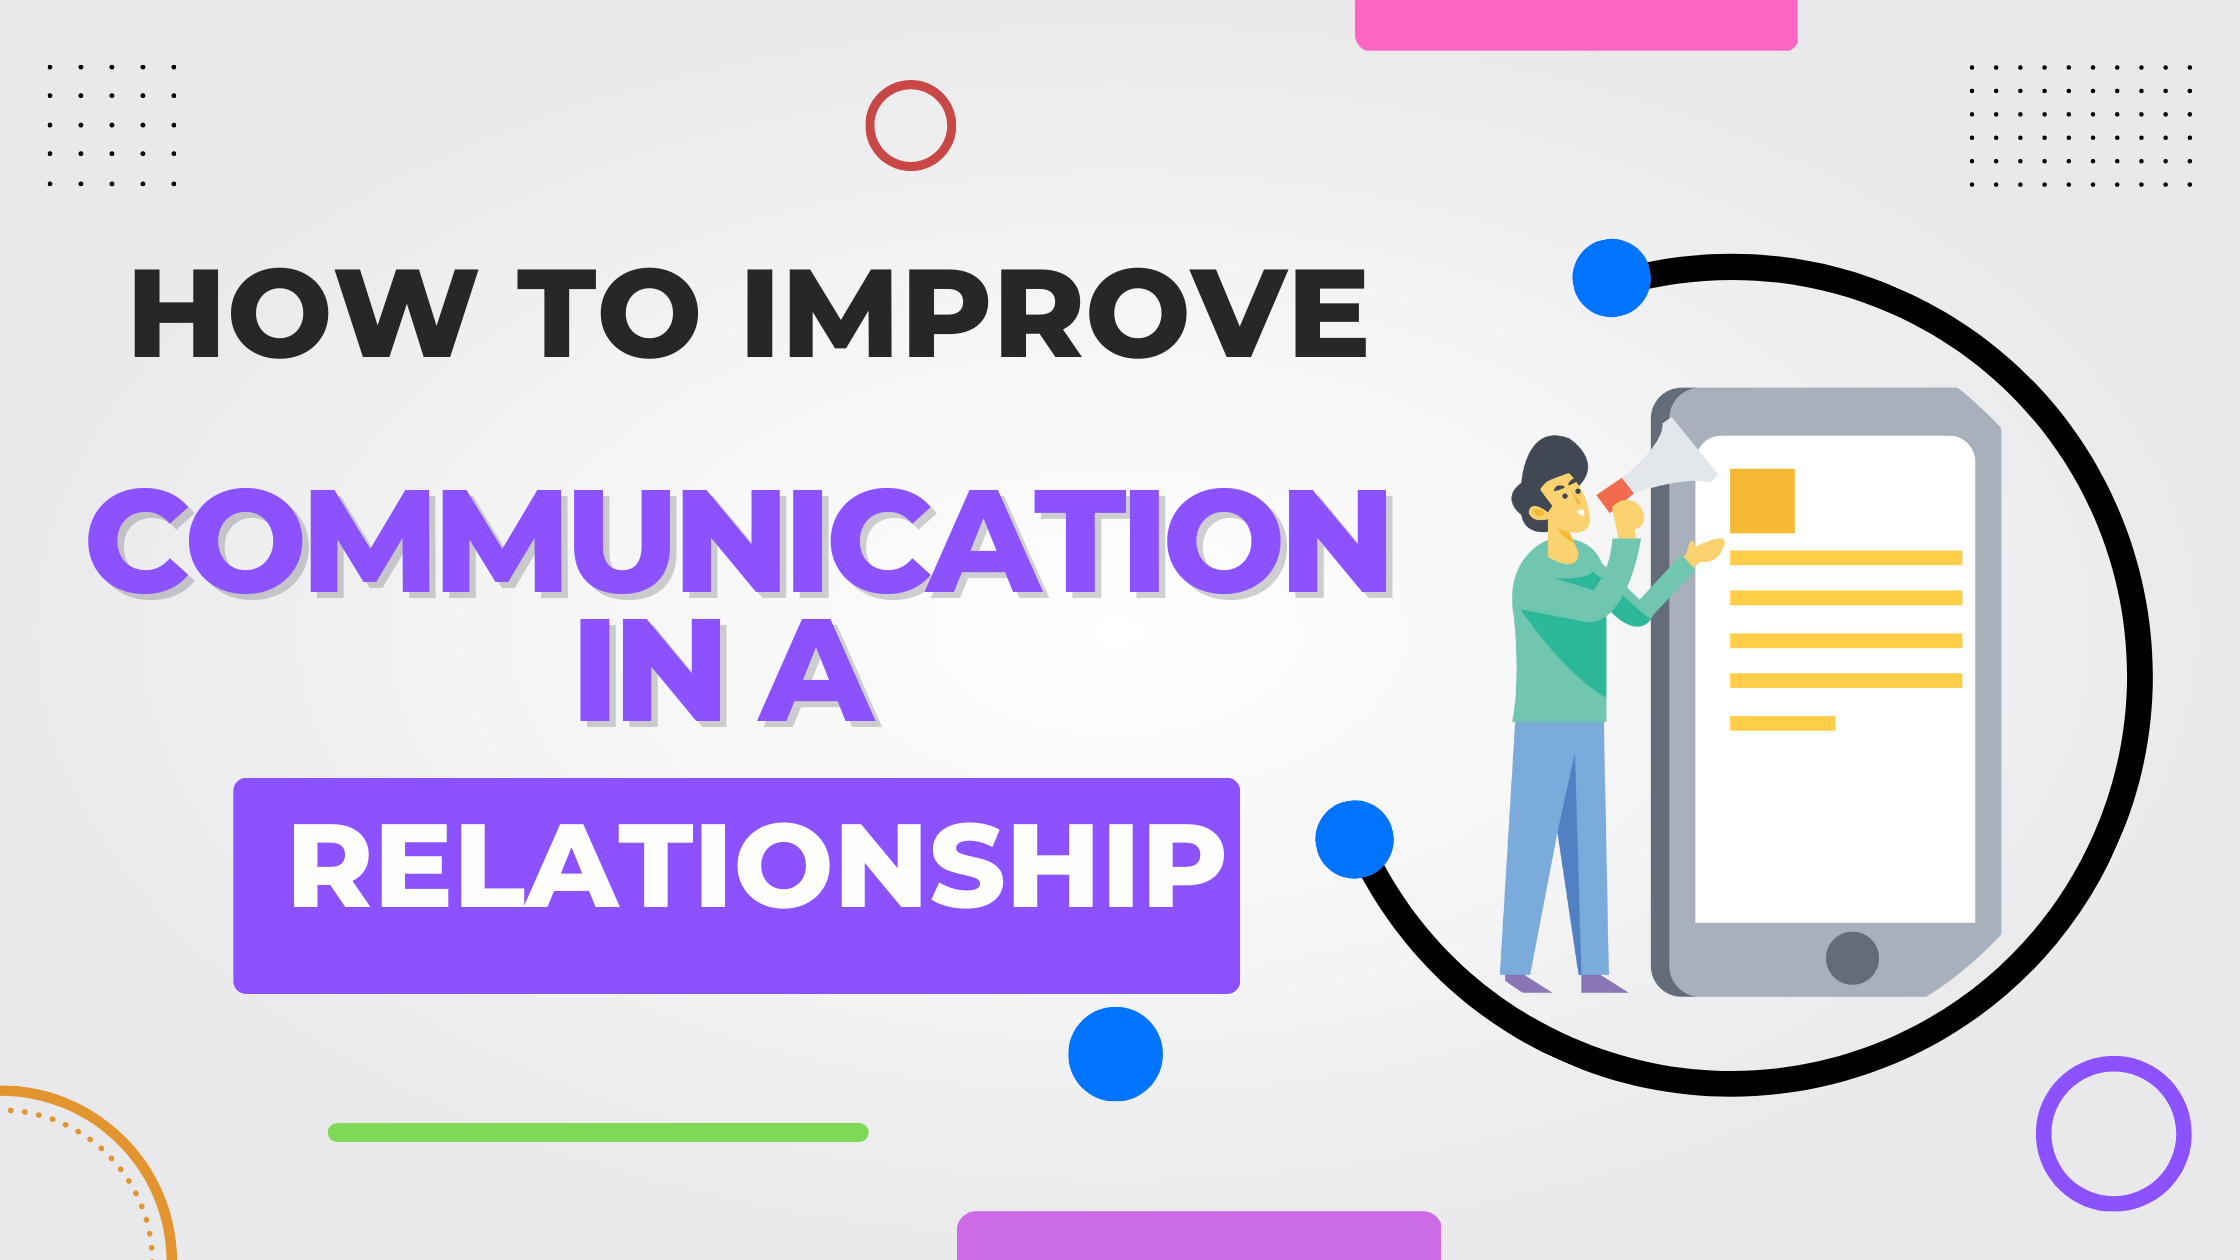 How to Improve Communication in a Relationship